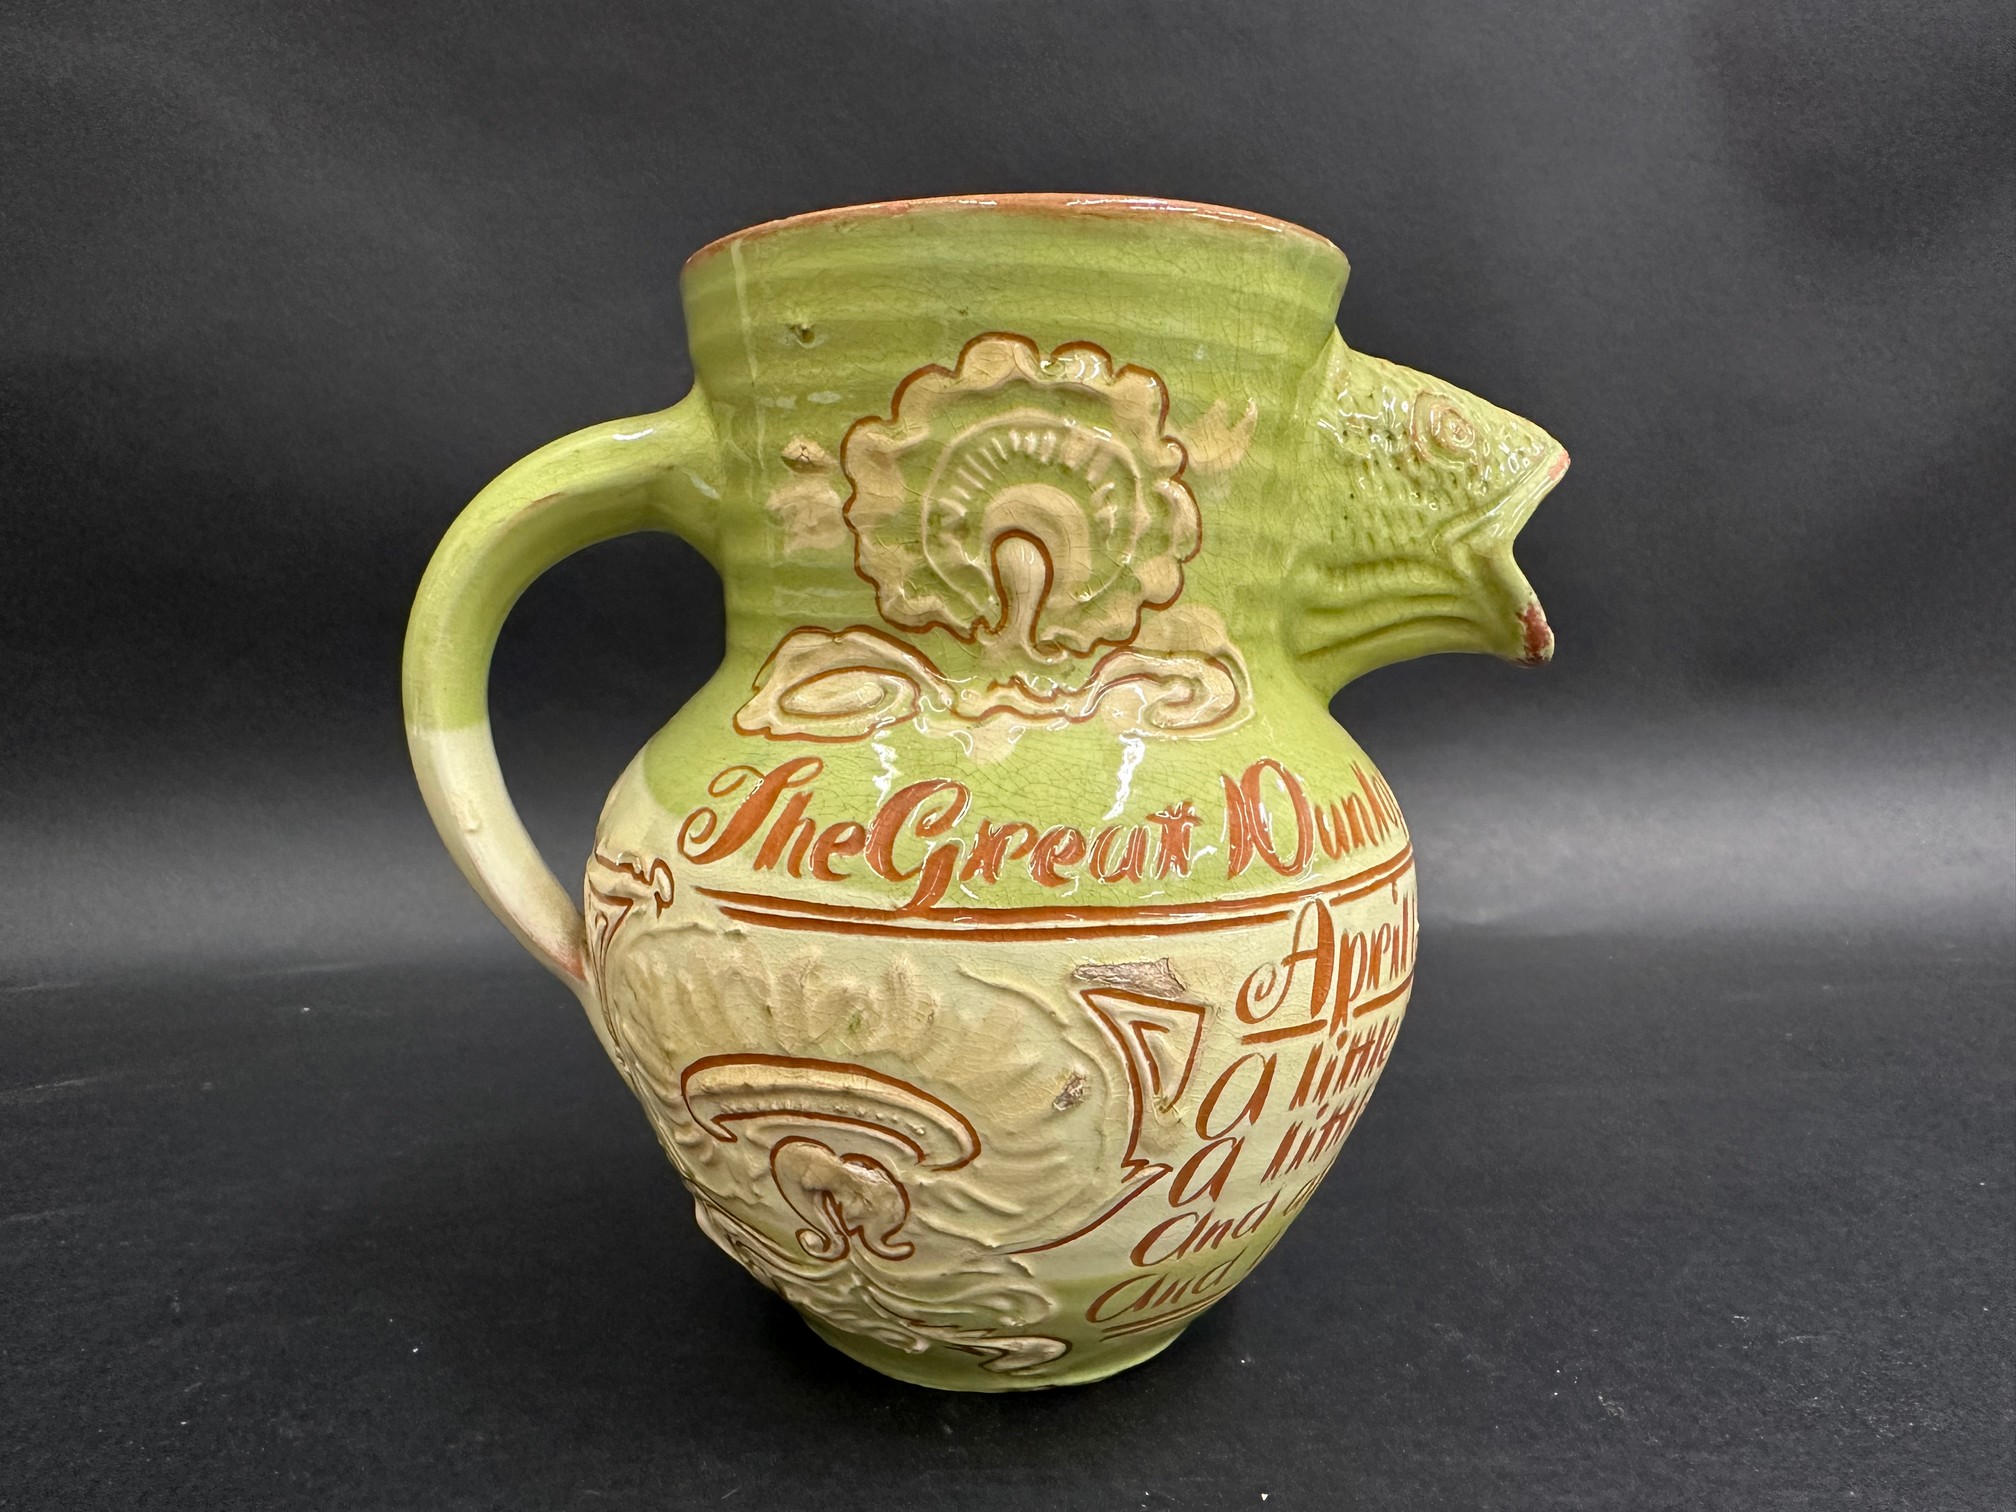 A rare 'The Great Dunlop Tyre Deal of Five Millions' Branham Pottery jug, circa 1896. - Image 3 of 5